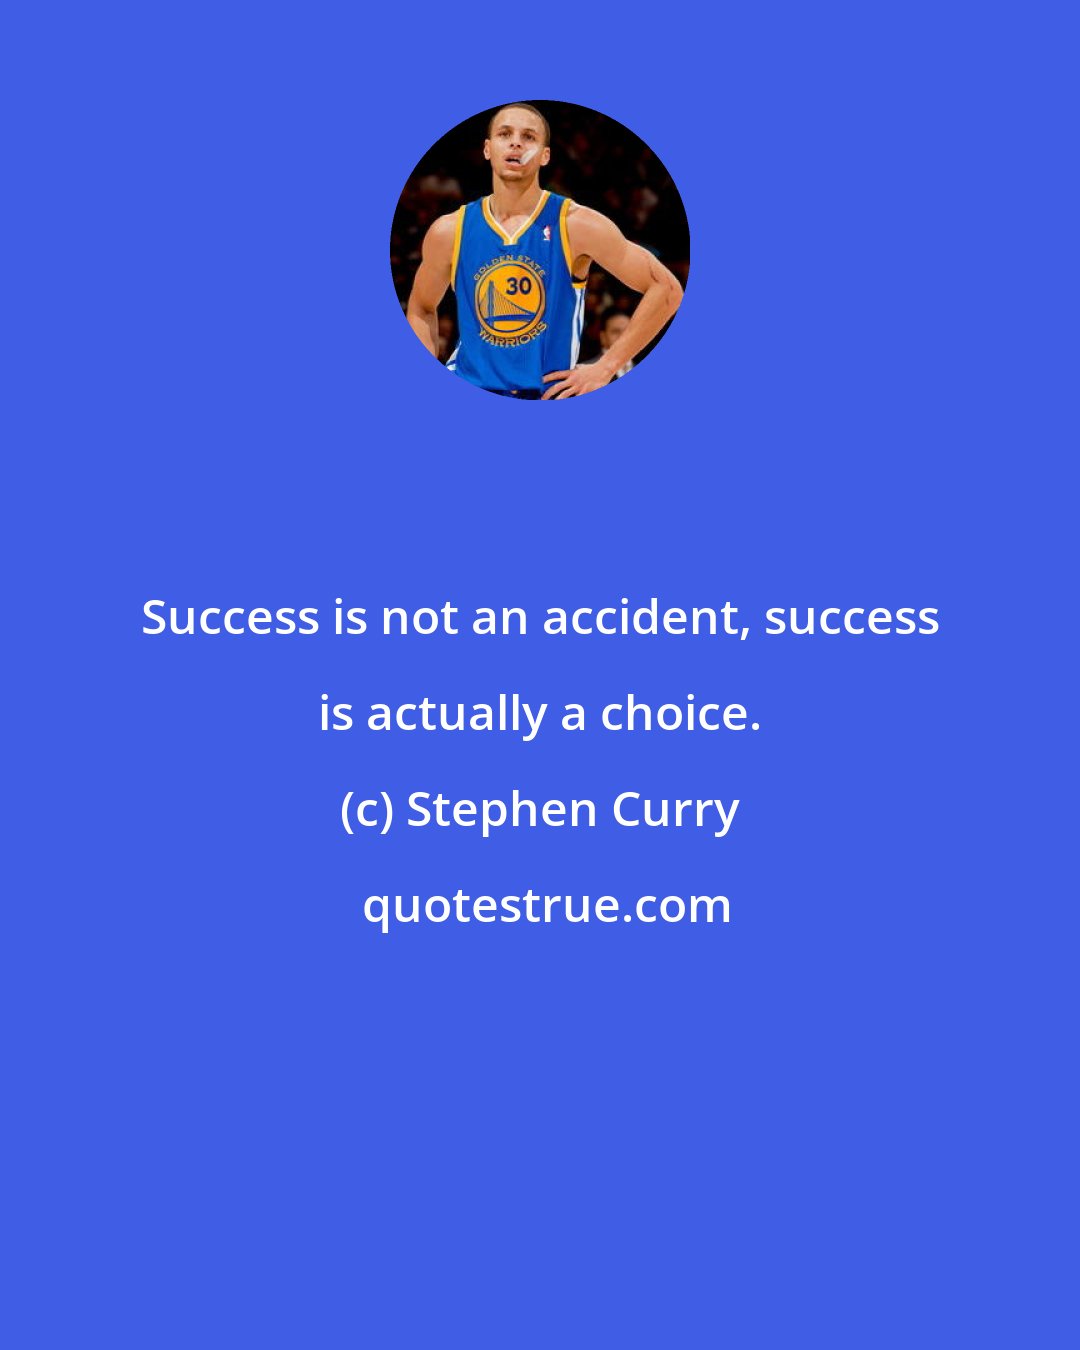 Stephen Curry: Success is not an accident, success is actually a choice.